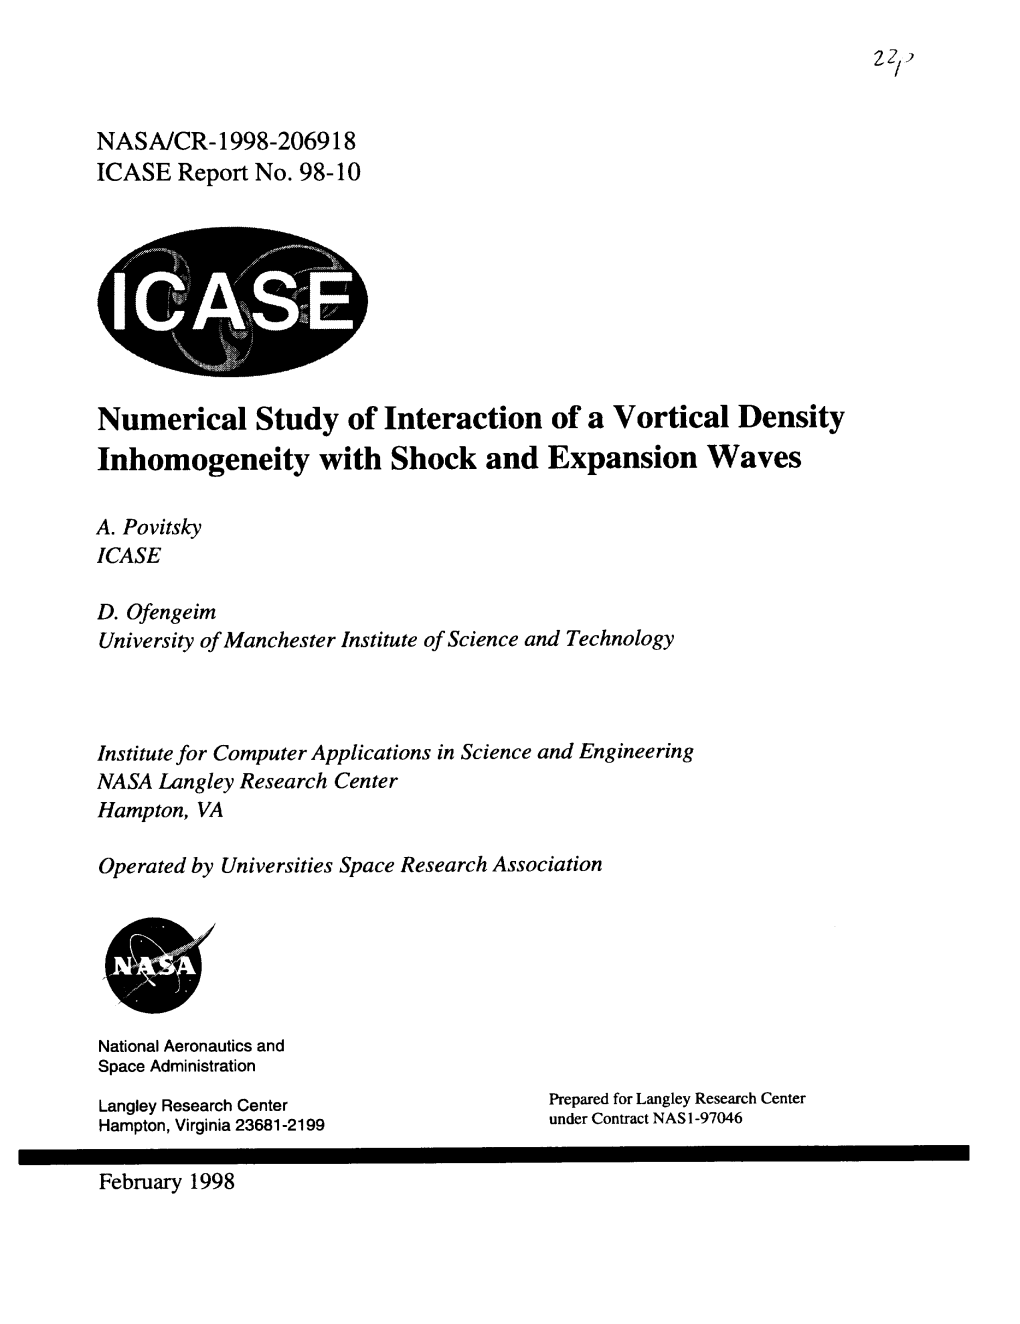 Numerical Study of Interaction of a Vortical Density Inhomogeneity with Shock and Expansion Waves